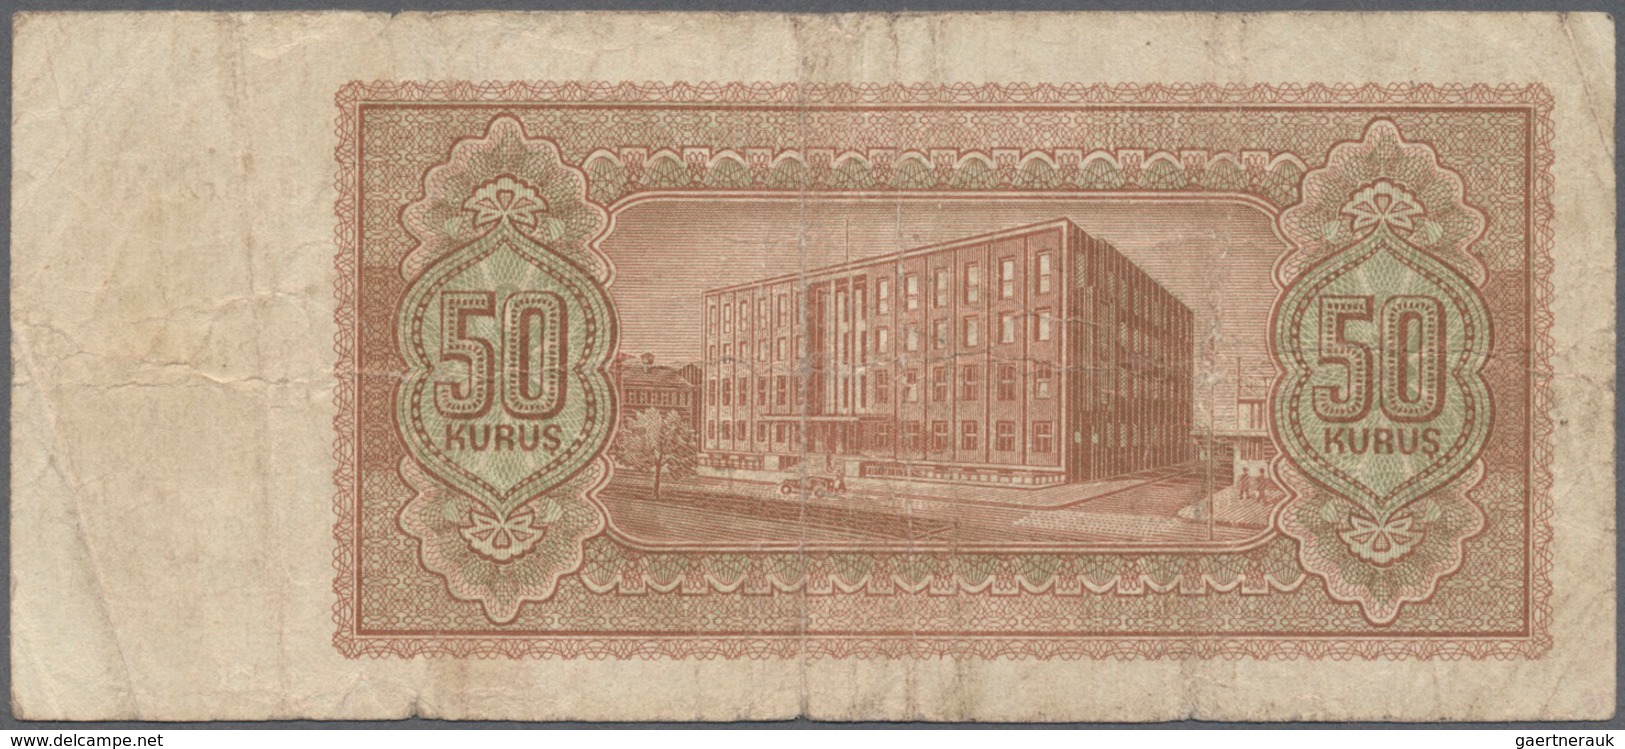 02528 Turkey / Türkei: 50 Kurus ND(1944) P. 134, Used With Several Folds And Staining In Paper, No Holes O - Turchia